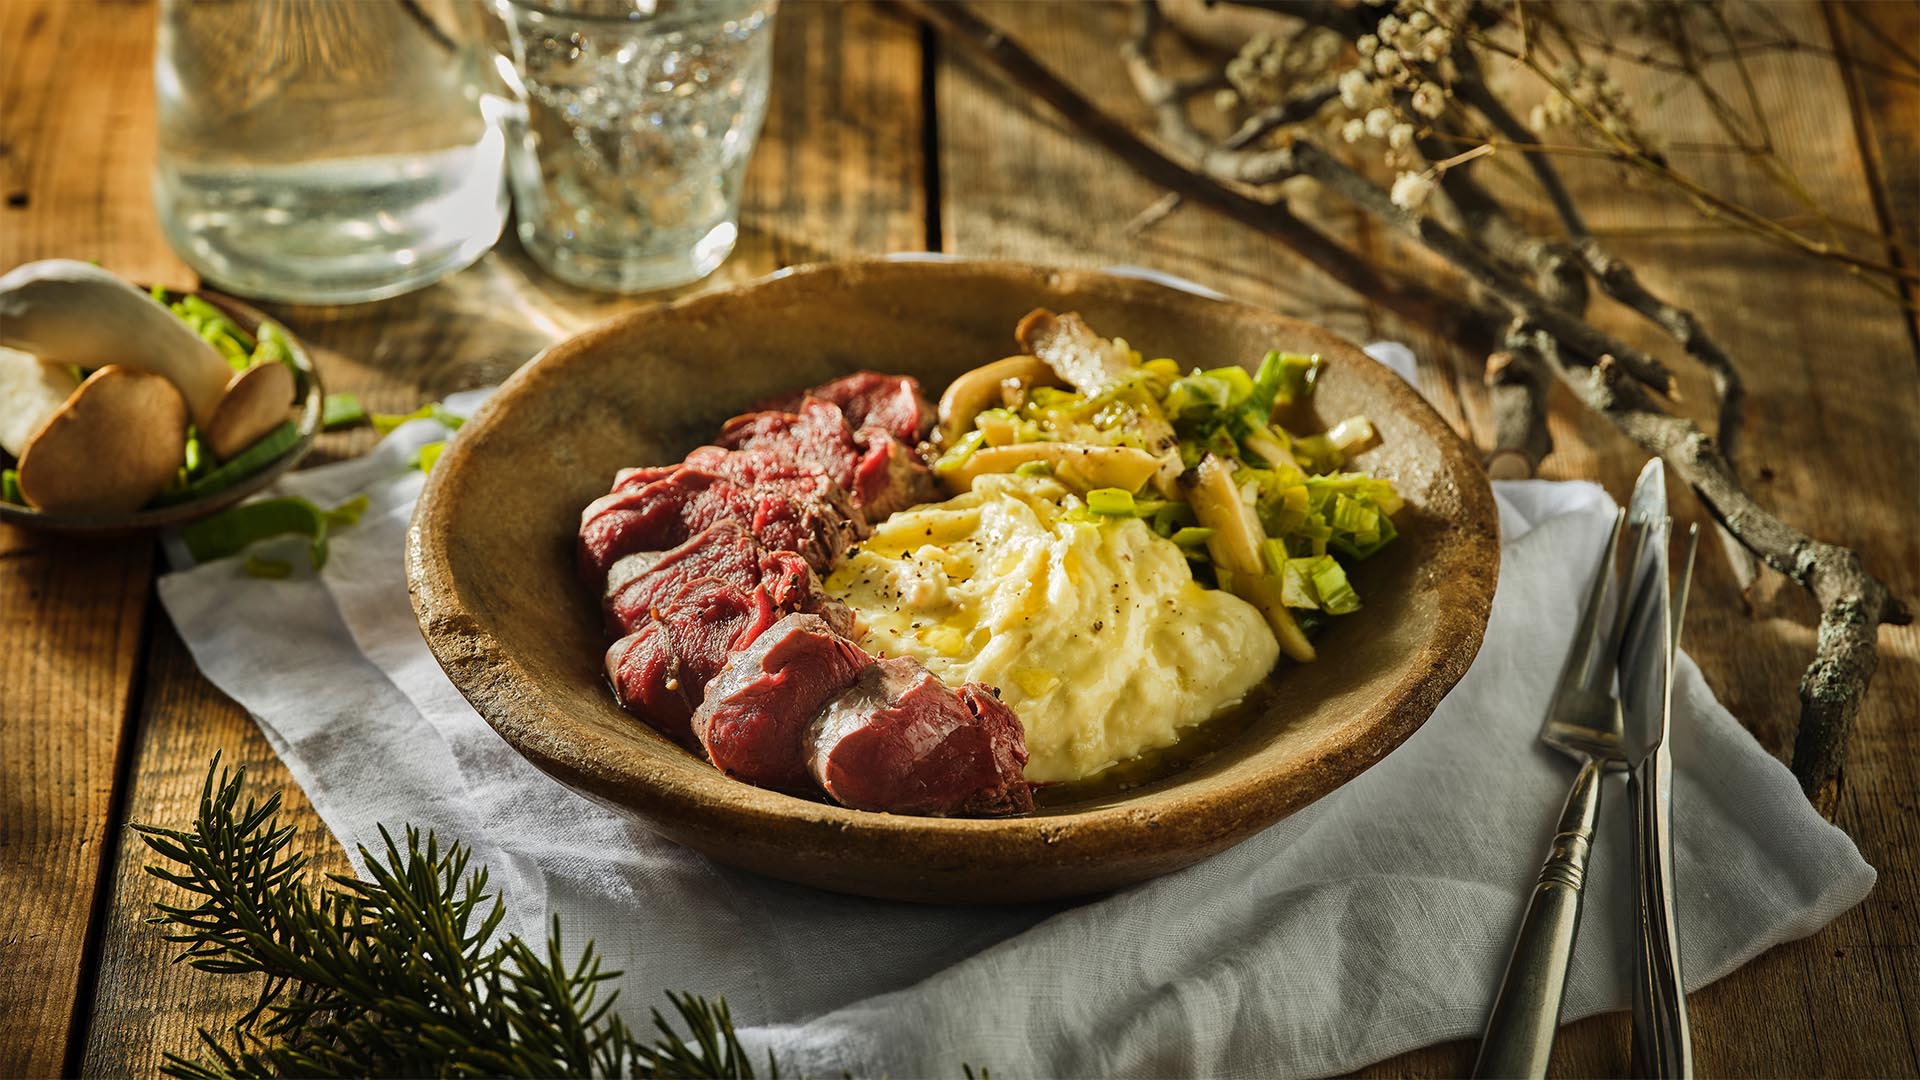 Round wooden bowl with mash, venison slices, and veg on a white napkin next to a knife and fork.